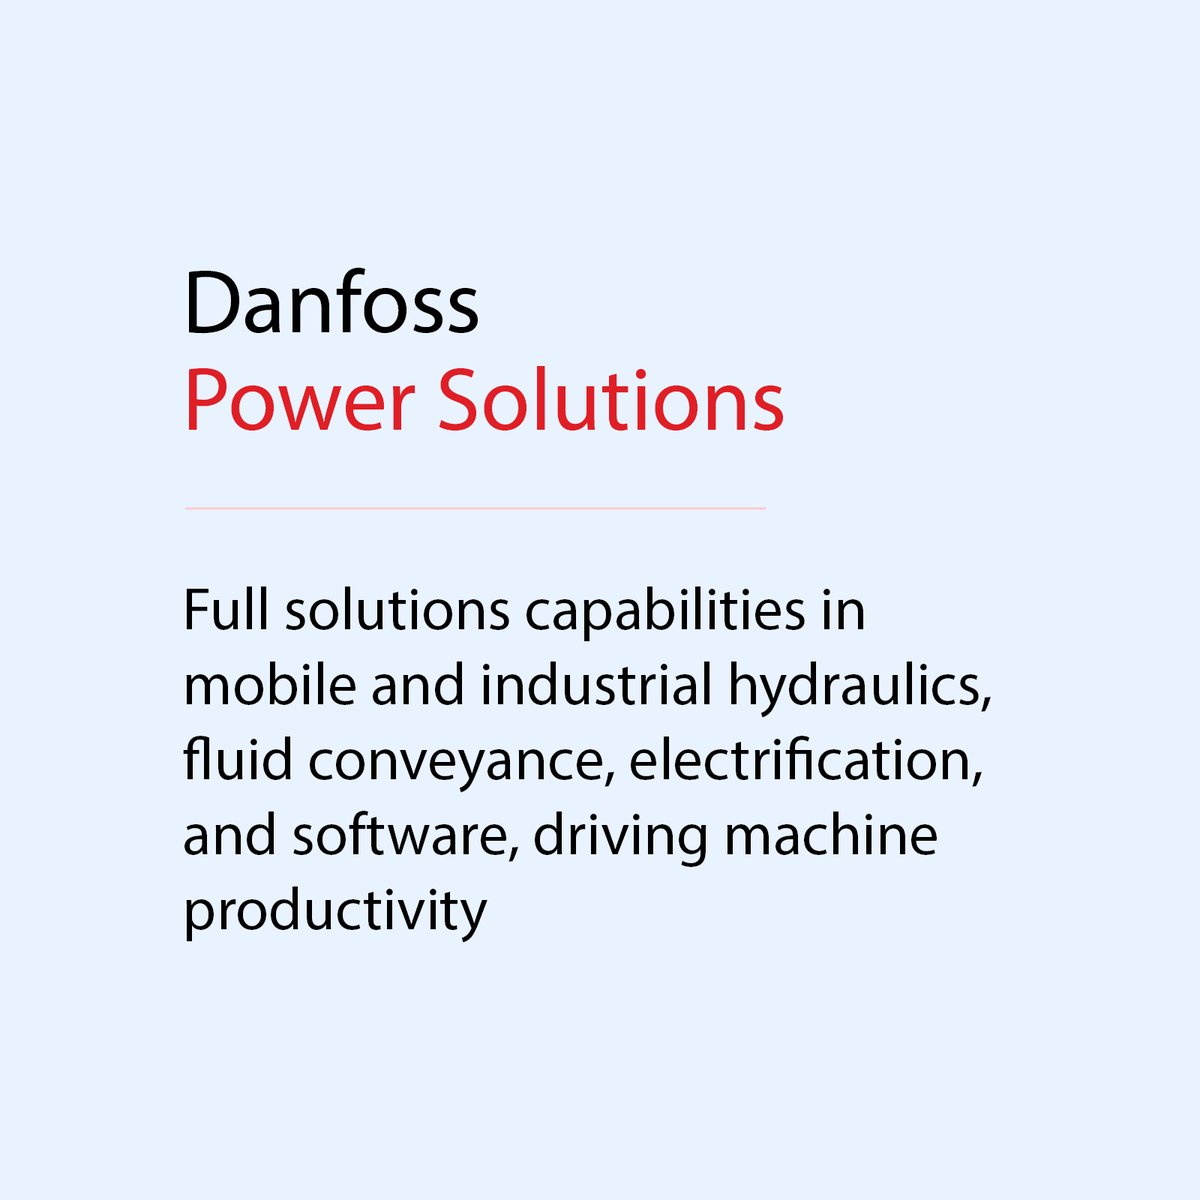 We are investing to enable our customers as they develop the machines that help feed and house the world’s growing population. Read more in our Integrated Annual Report: bit.ly/3TrfXkC #Danfoss2023 #AnnualReport #AnnualResults #Danfoss2023 #WhyEE #EnergyEfficiency